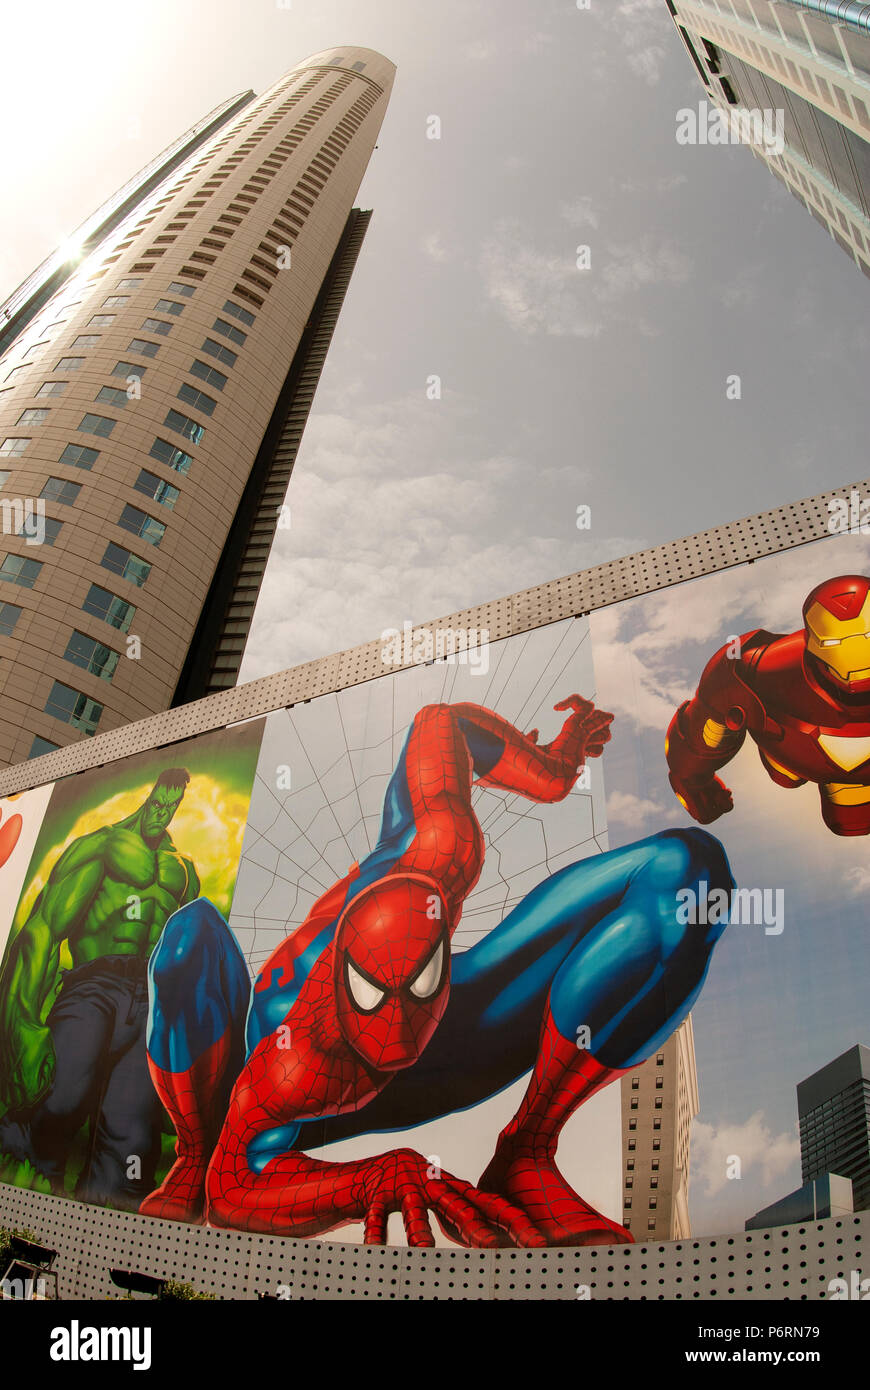 Giant Super-Hero poster with superhero looking down to stree level Stock Photo